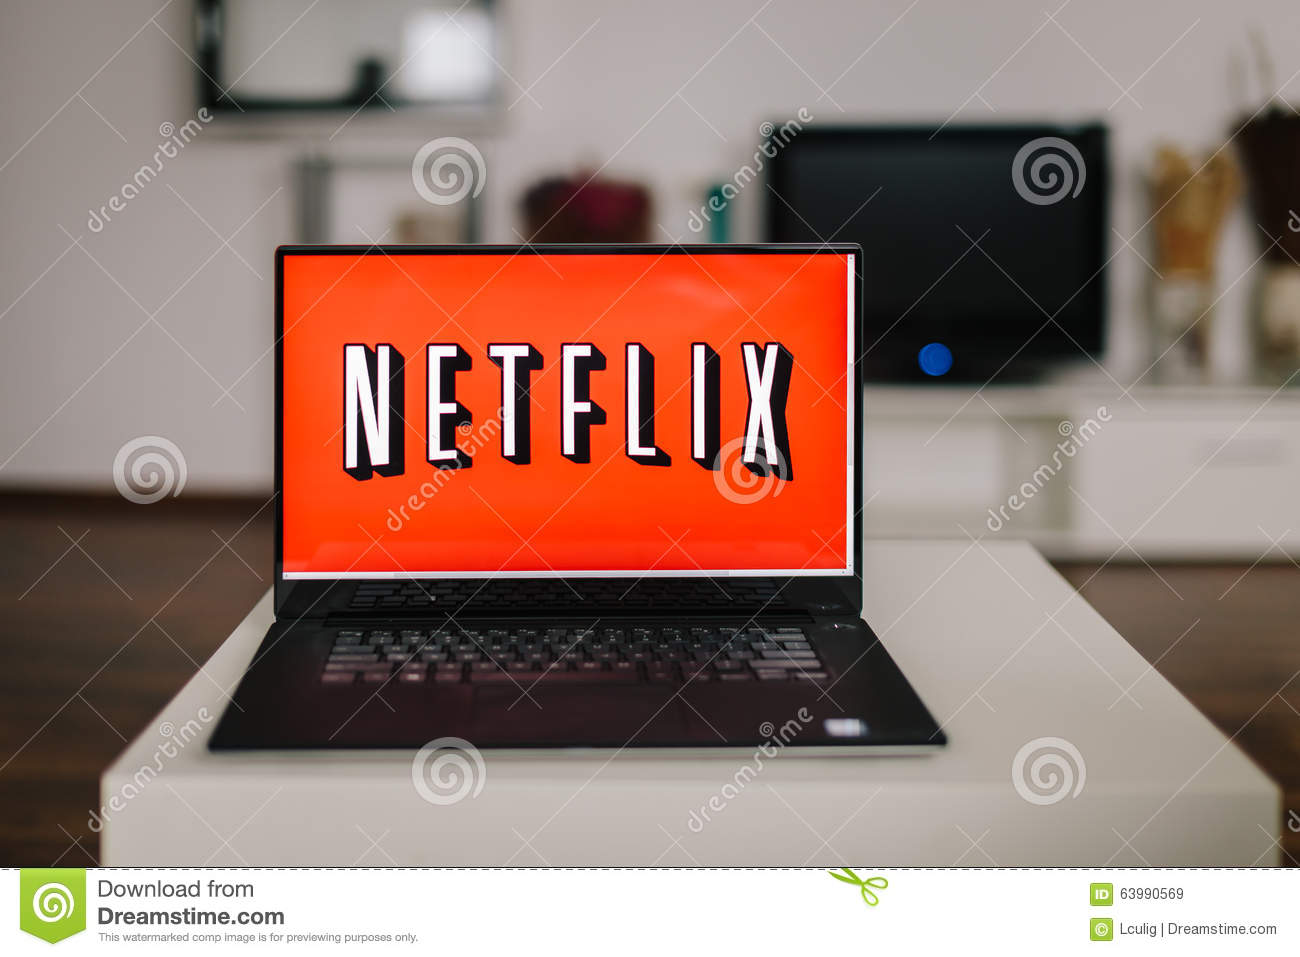 How To Download From Netflix On Mac Laptop